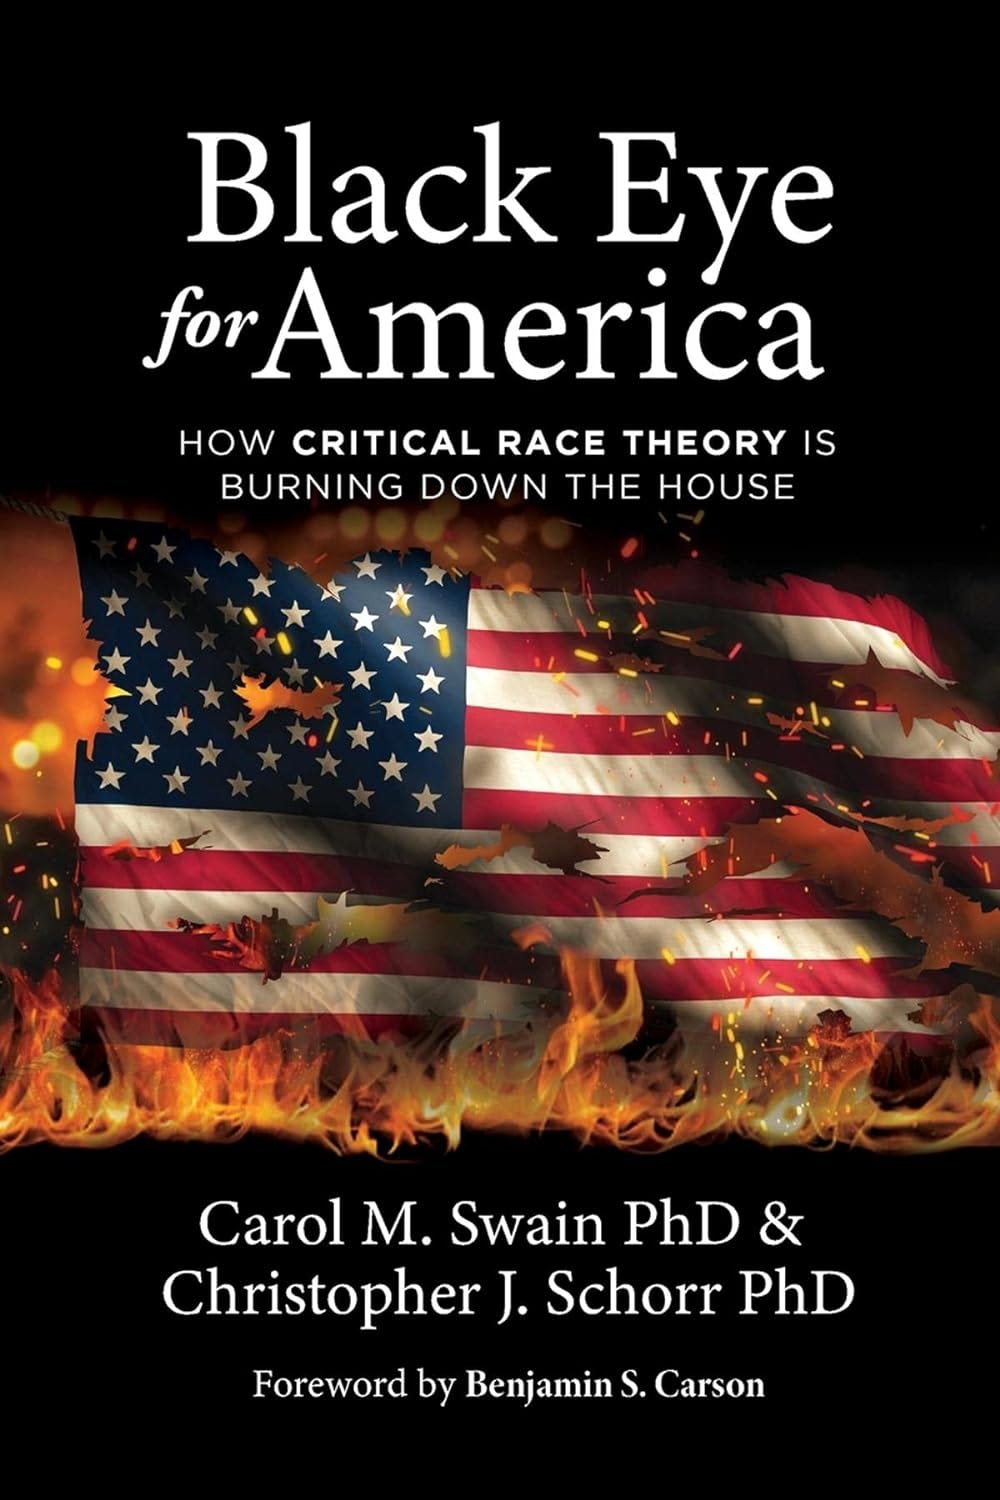 “Black Eye for America” by Carol M. Swain and Christopher J. Schorr, with a foreword by Dr. Benjamin Carson